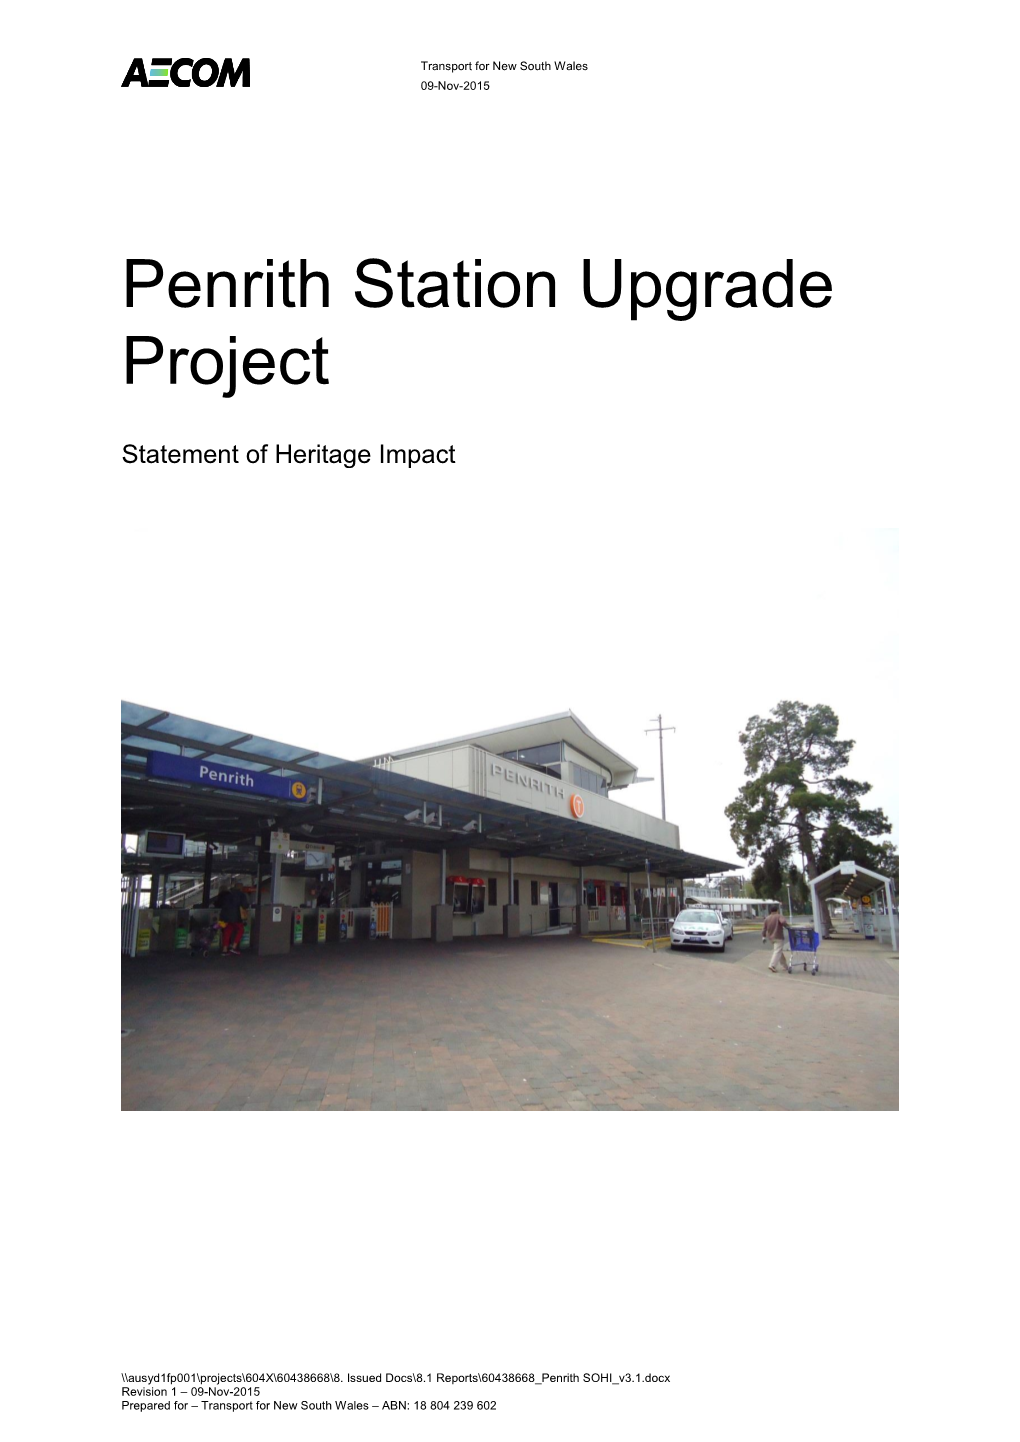 Penrith Station Upgrade Project Statement of Heritage Impact